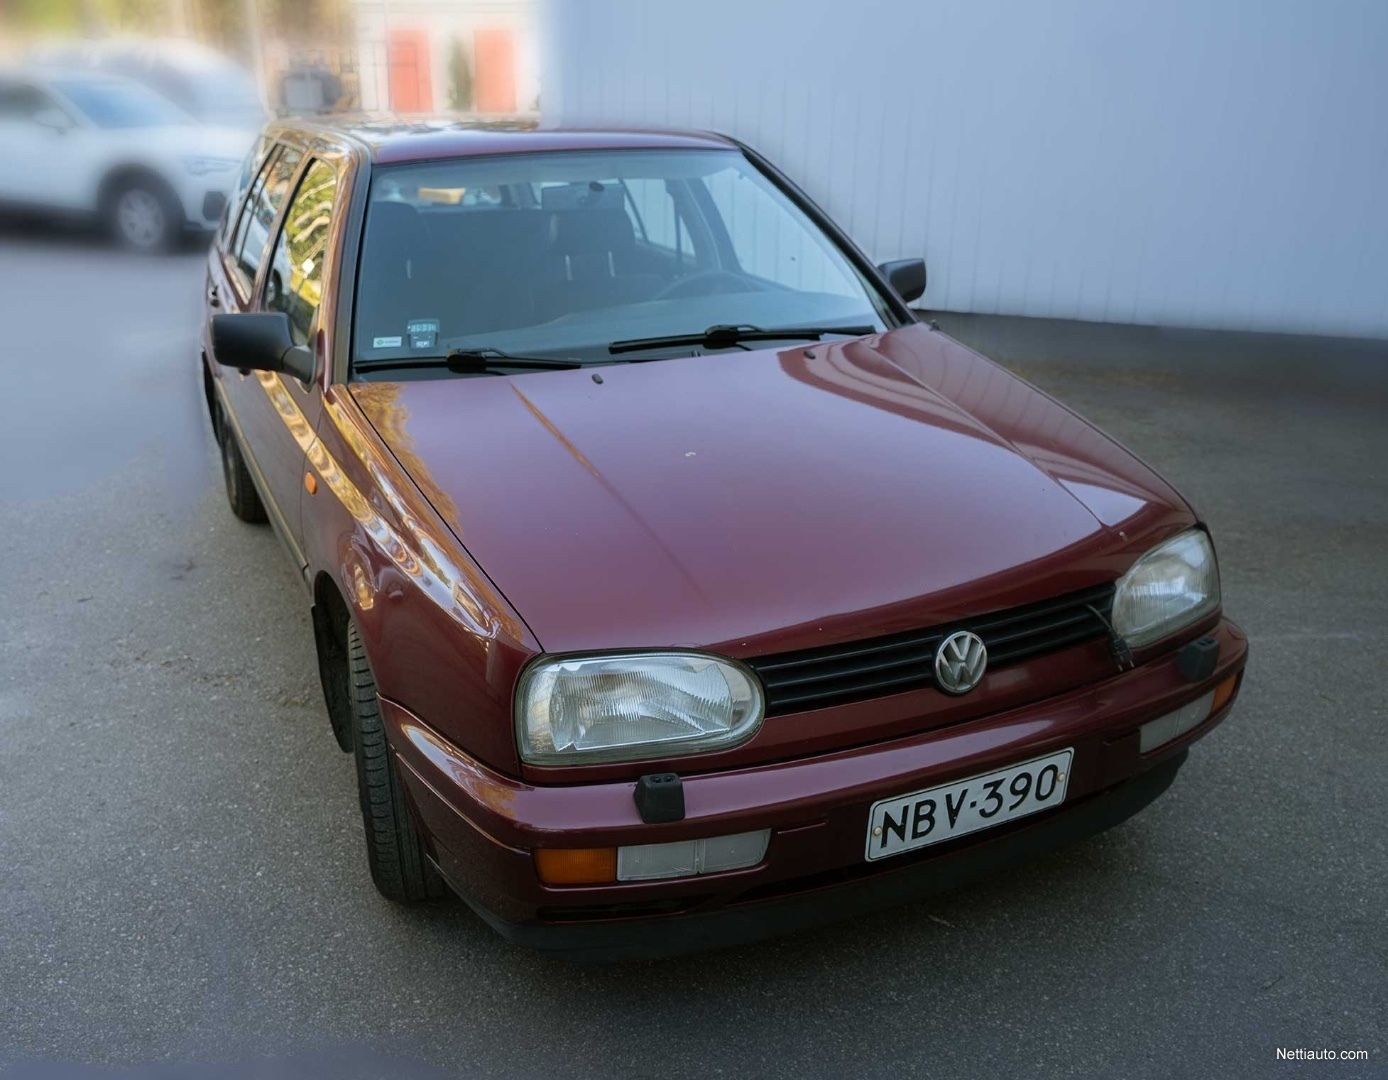 Volkswagen Golf 1.9 TDsl Variant CL Station Wagon 1997 - Used vehicle -  Nettiauto